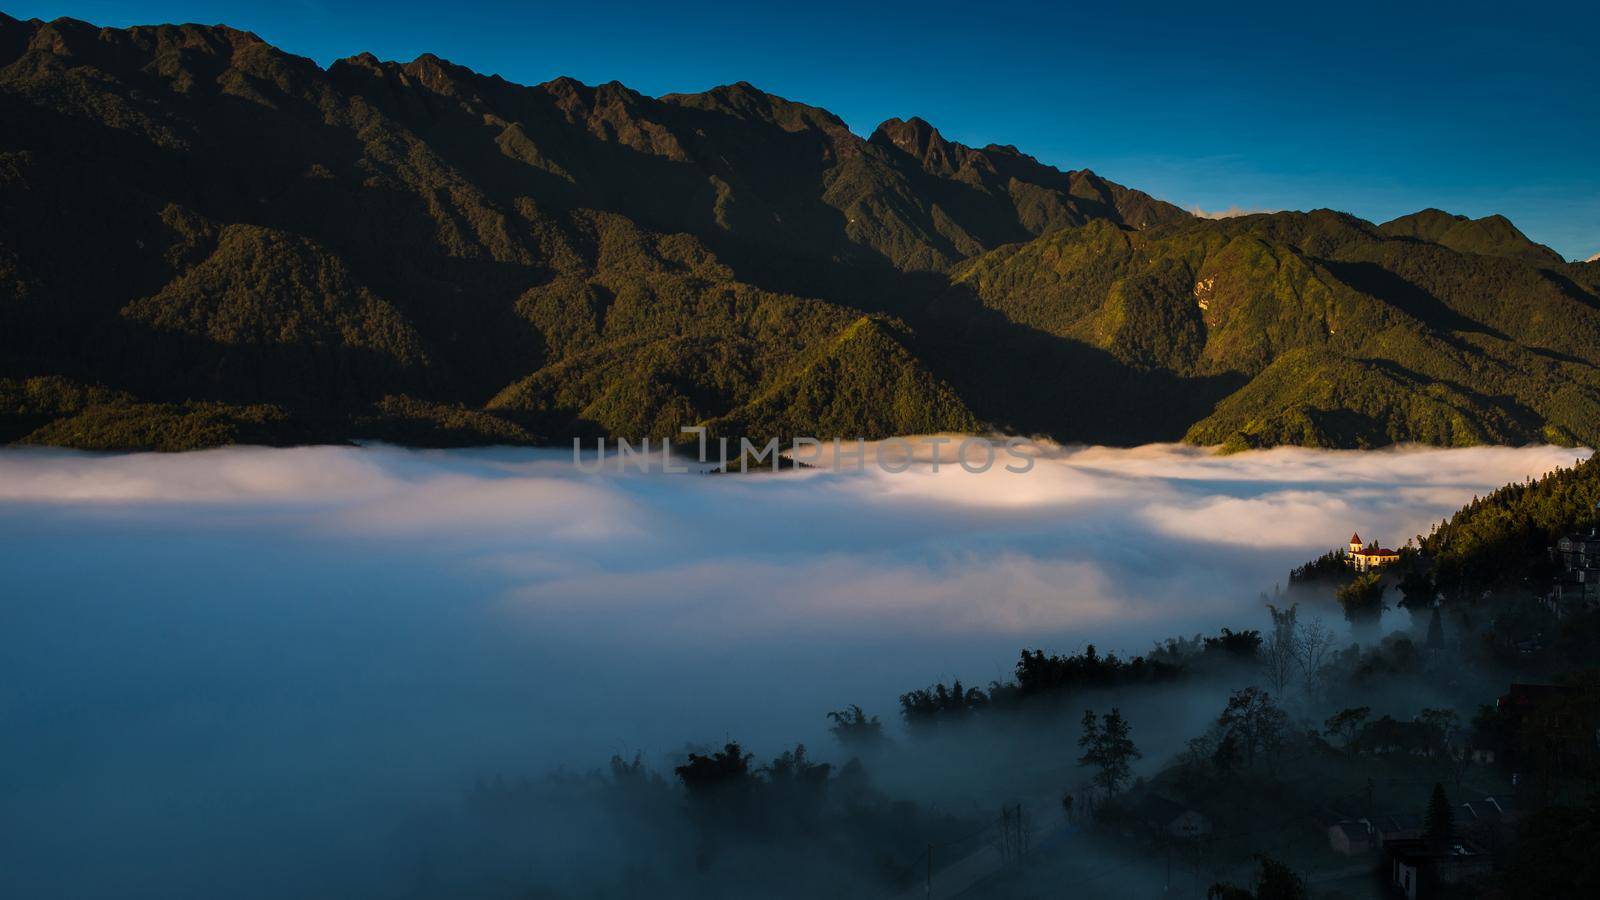 Sapa valley city in the mist in the morning, Vietnam by Nuamfolio